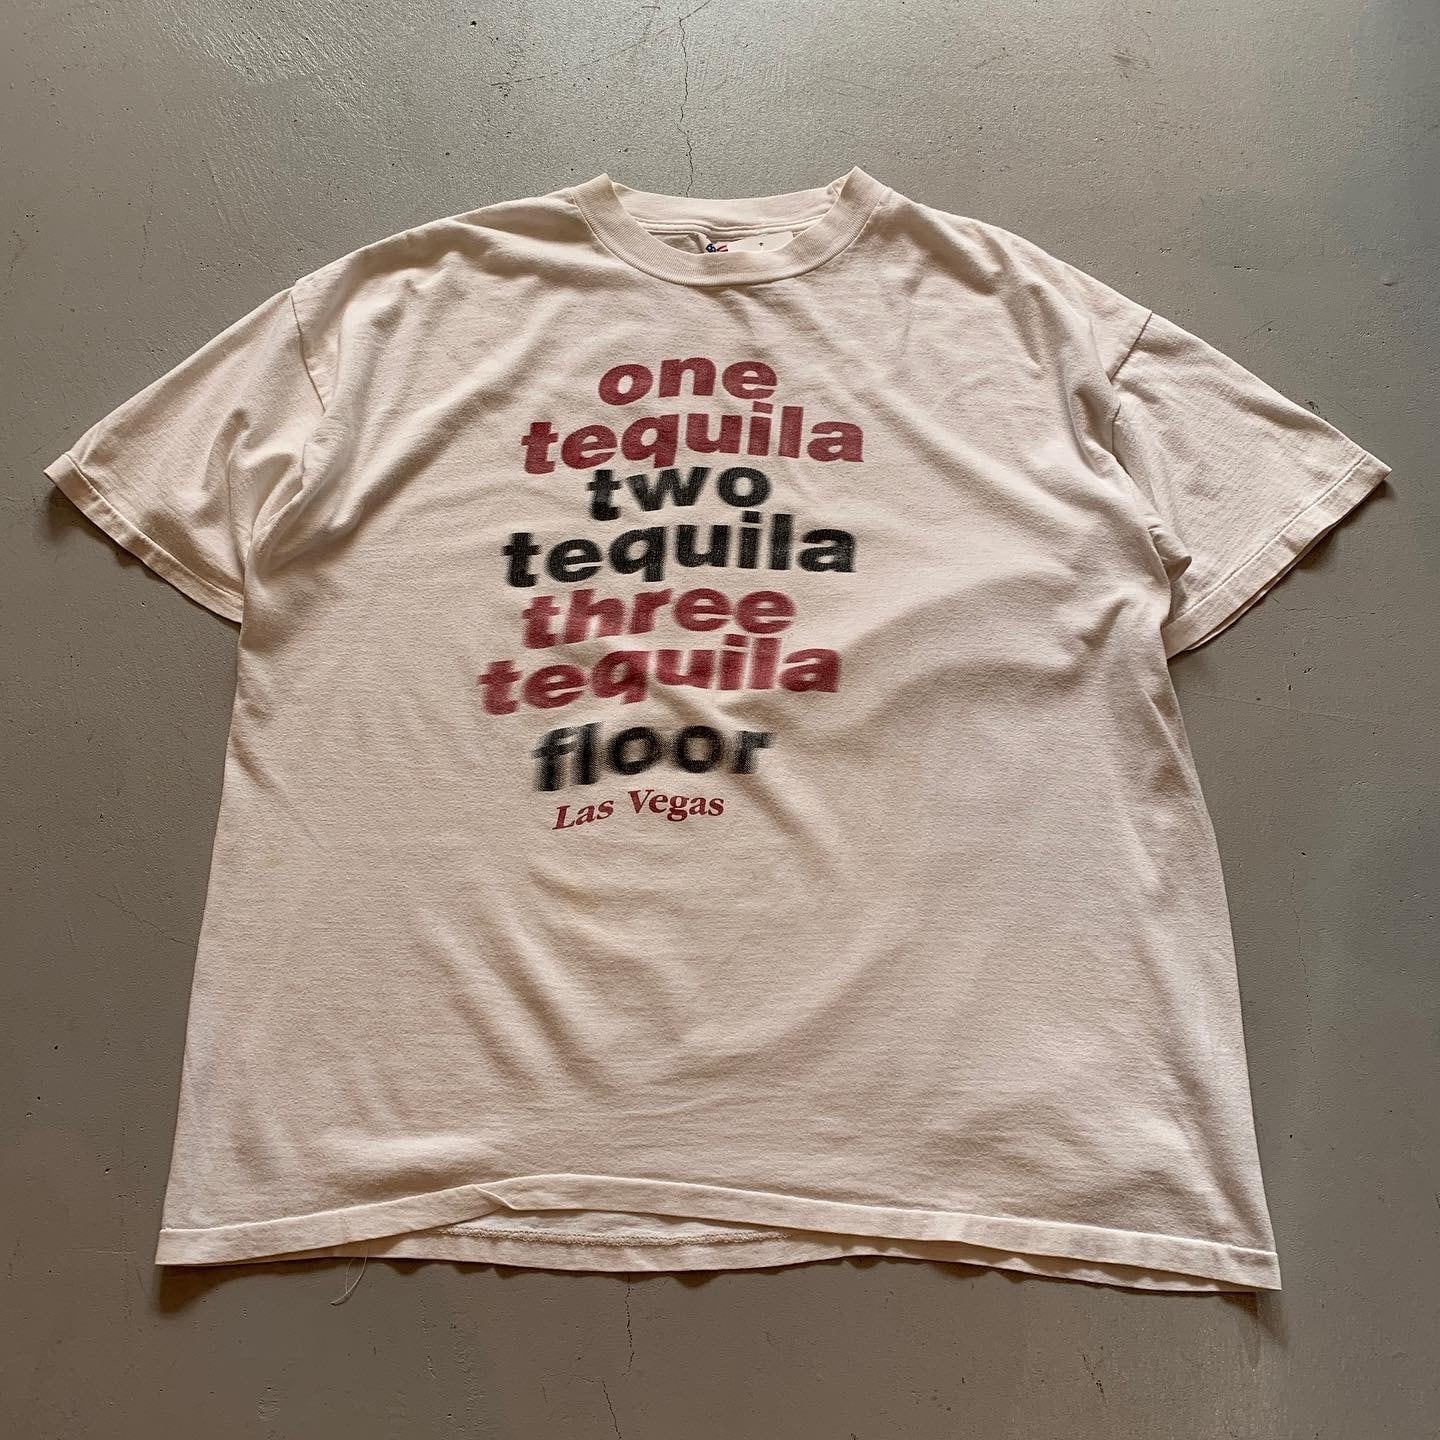 〜90s tequila T-shirt【高円寺店】 | What’z up powered by BASE